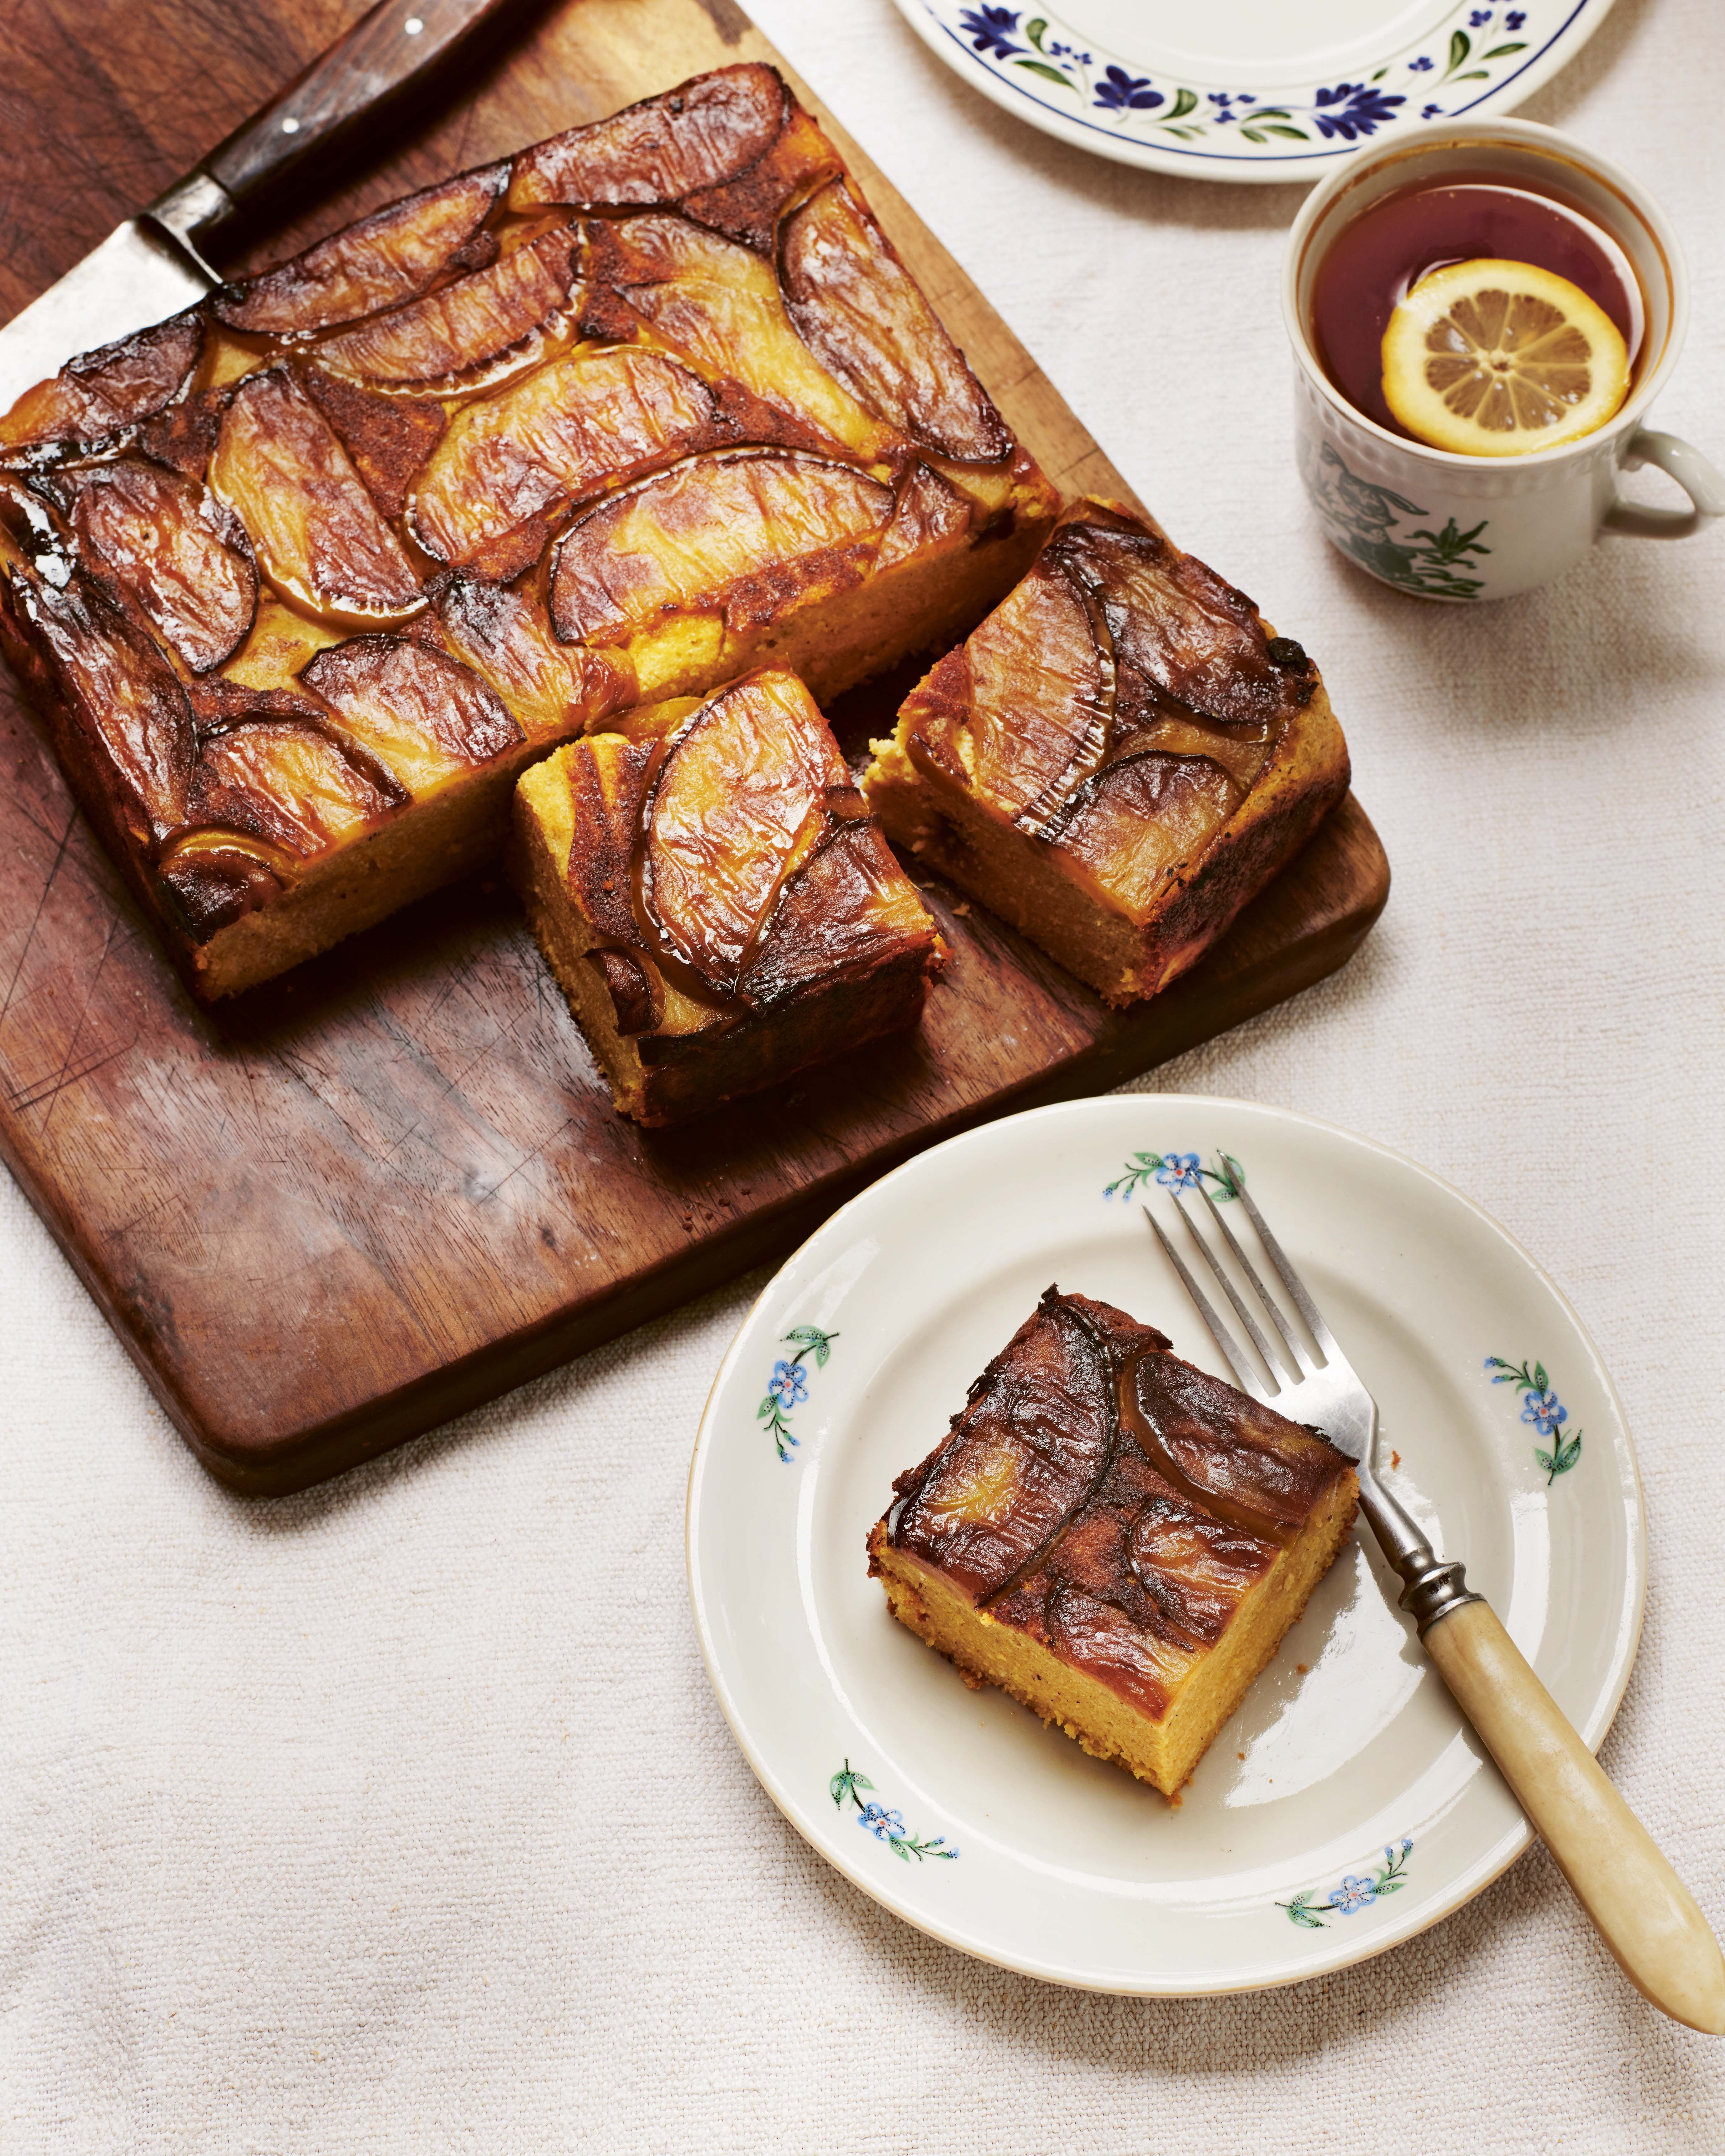 Curd cake with caramelised apples